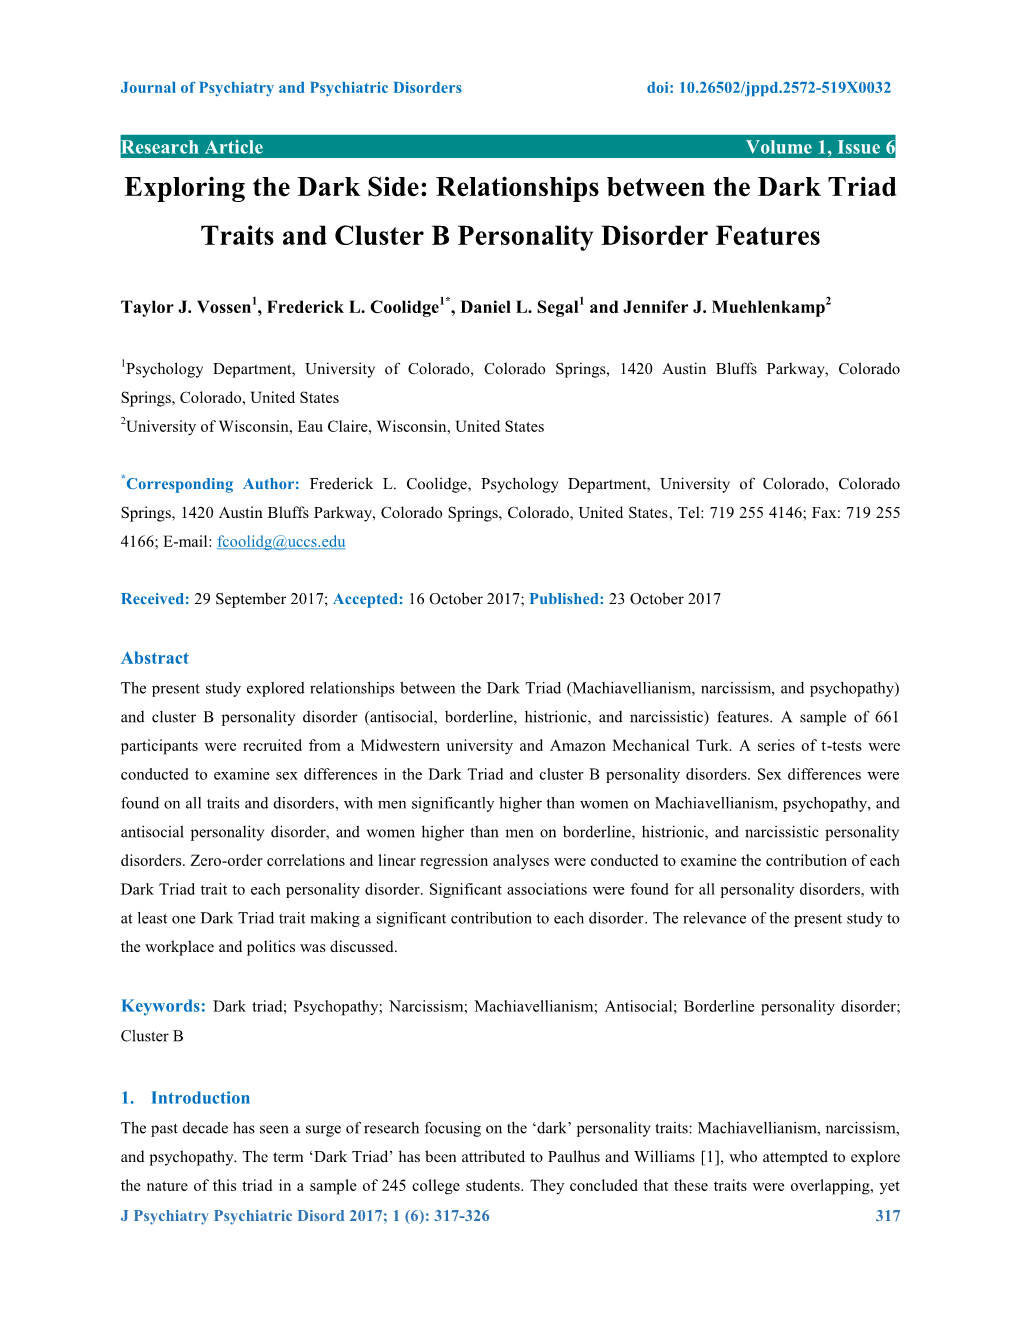 Relationships Between the Dark Triad Traits and Cluster B Personality Disorder Features